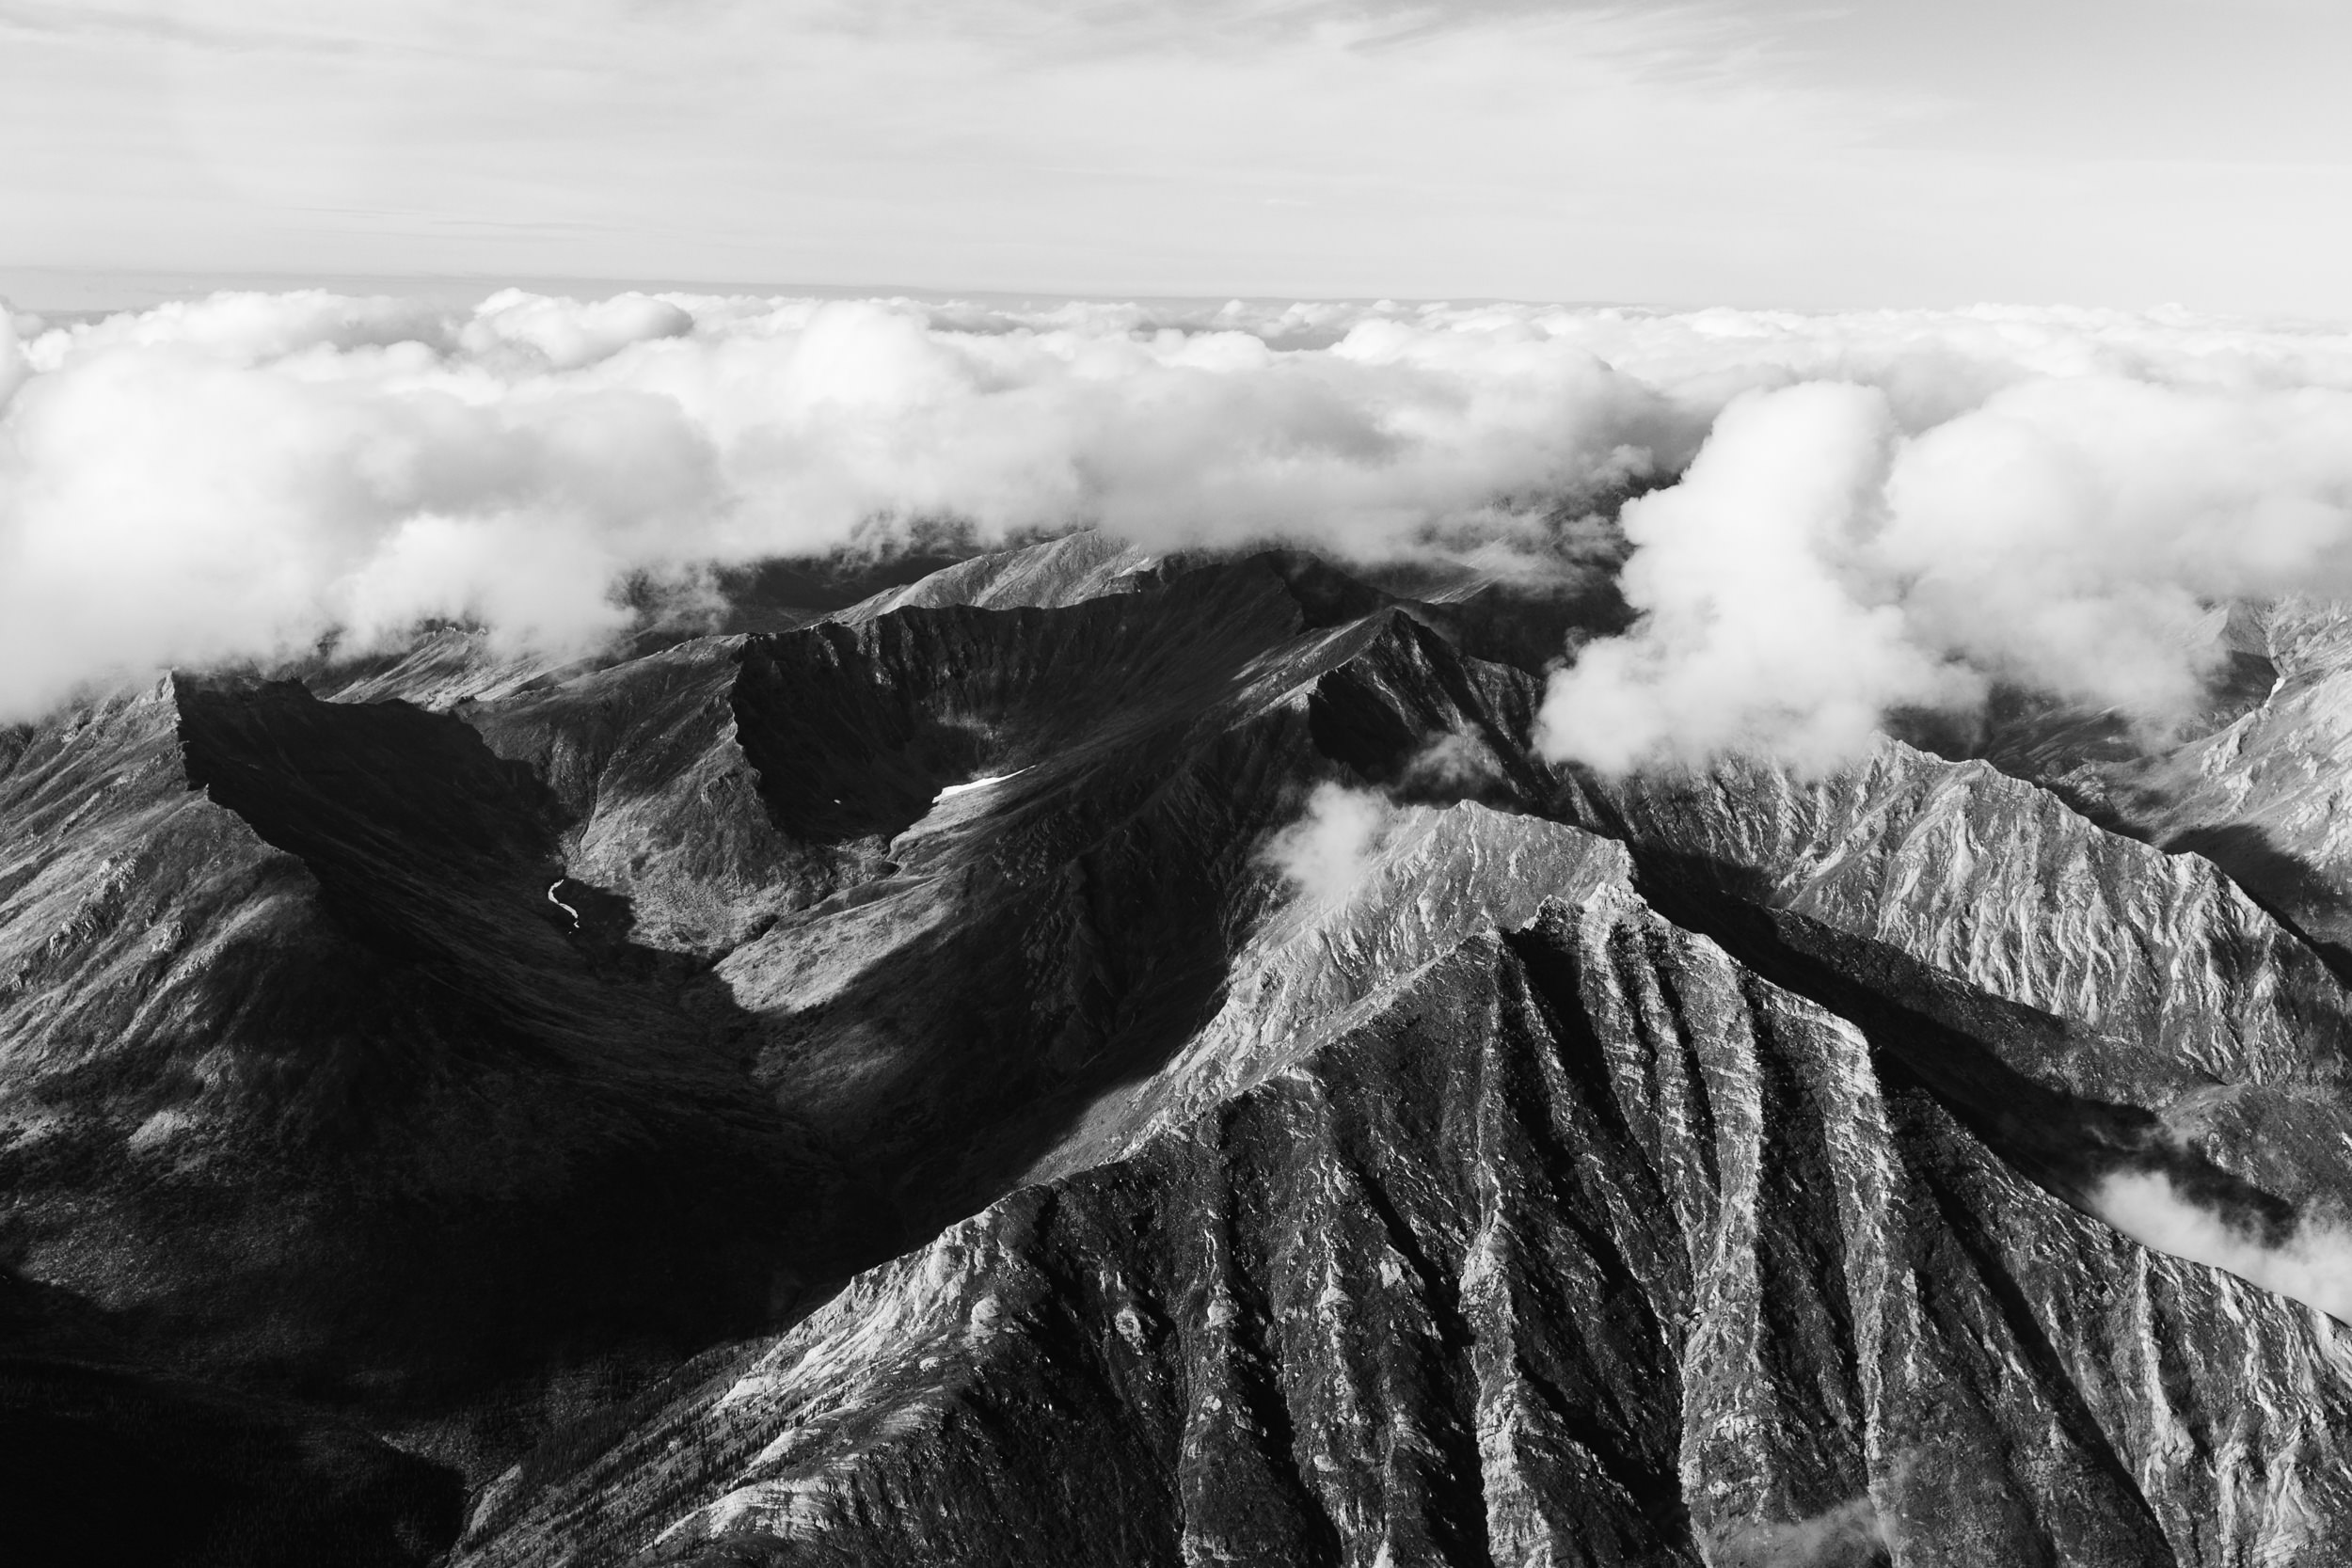 Flight tour of the Arrigetch Peaks in the Brooks Range, Gates of the Arctic National Park in northern Alaska | The Hearnes Adventure Wedding Photography